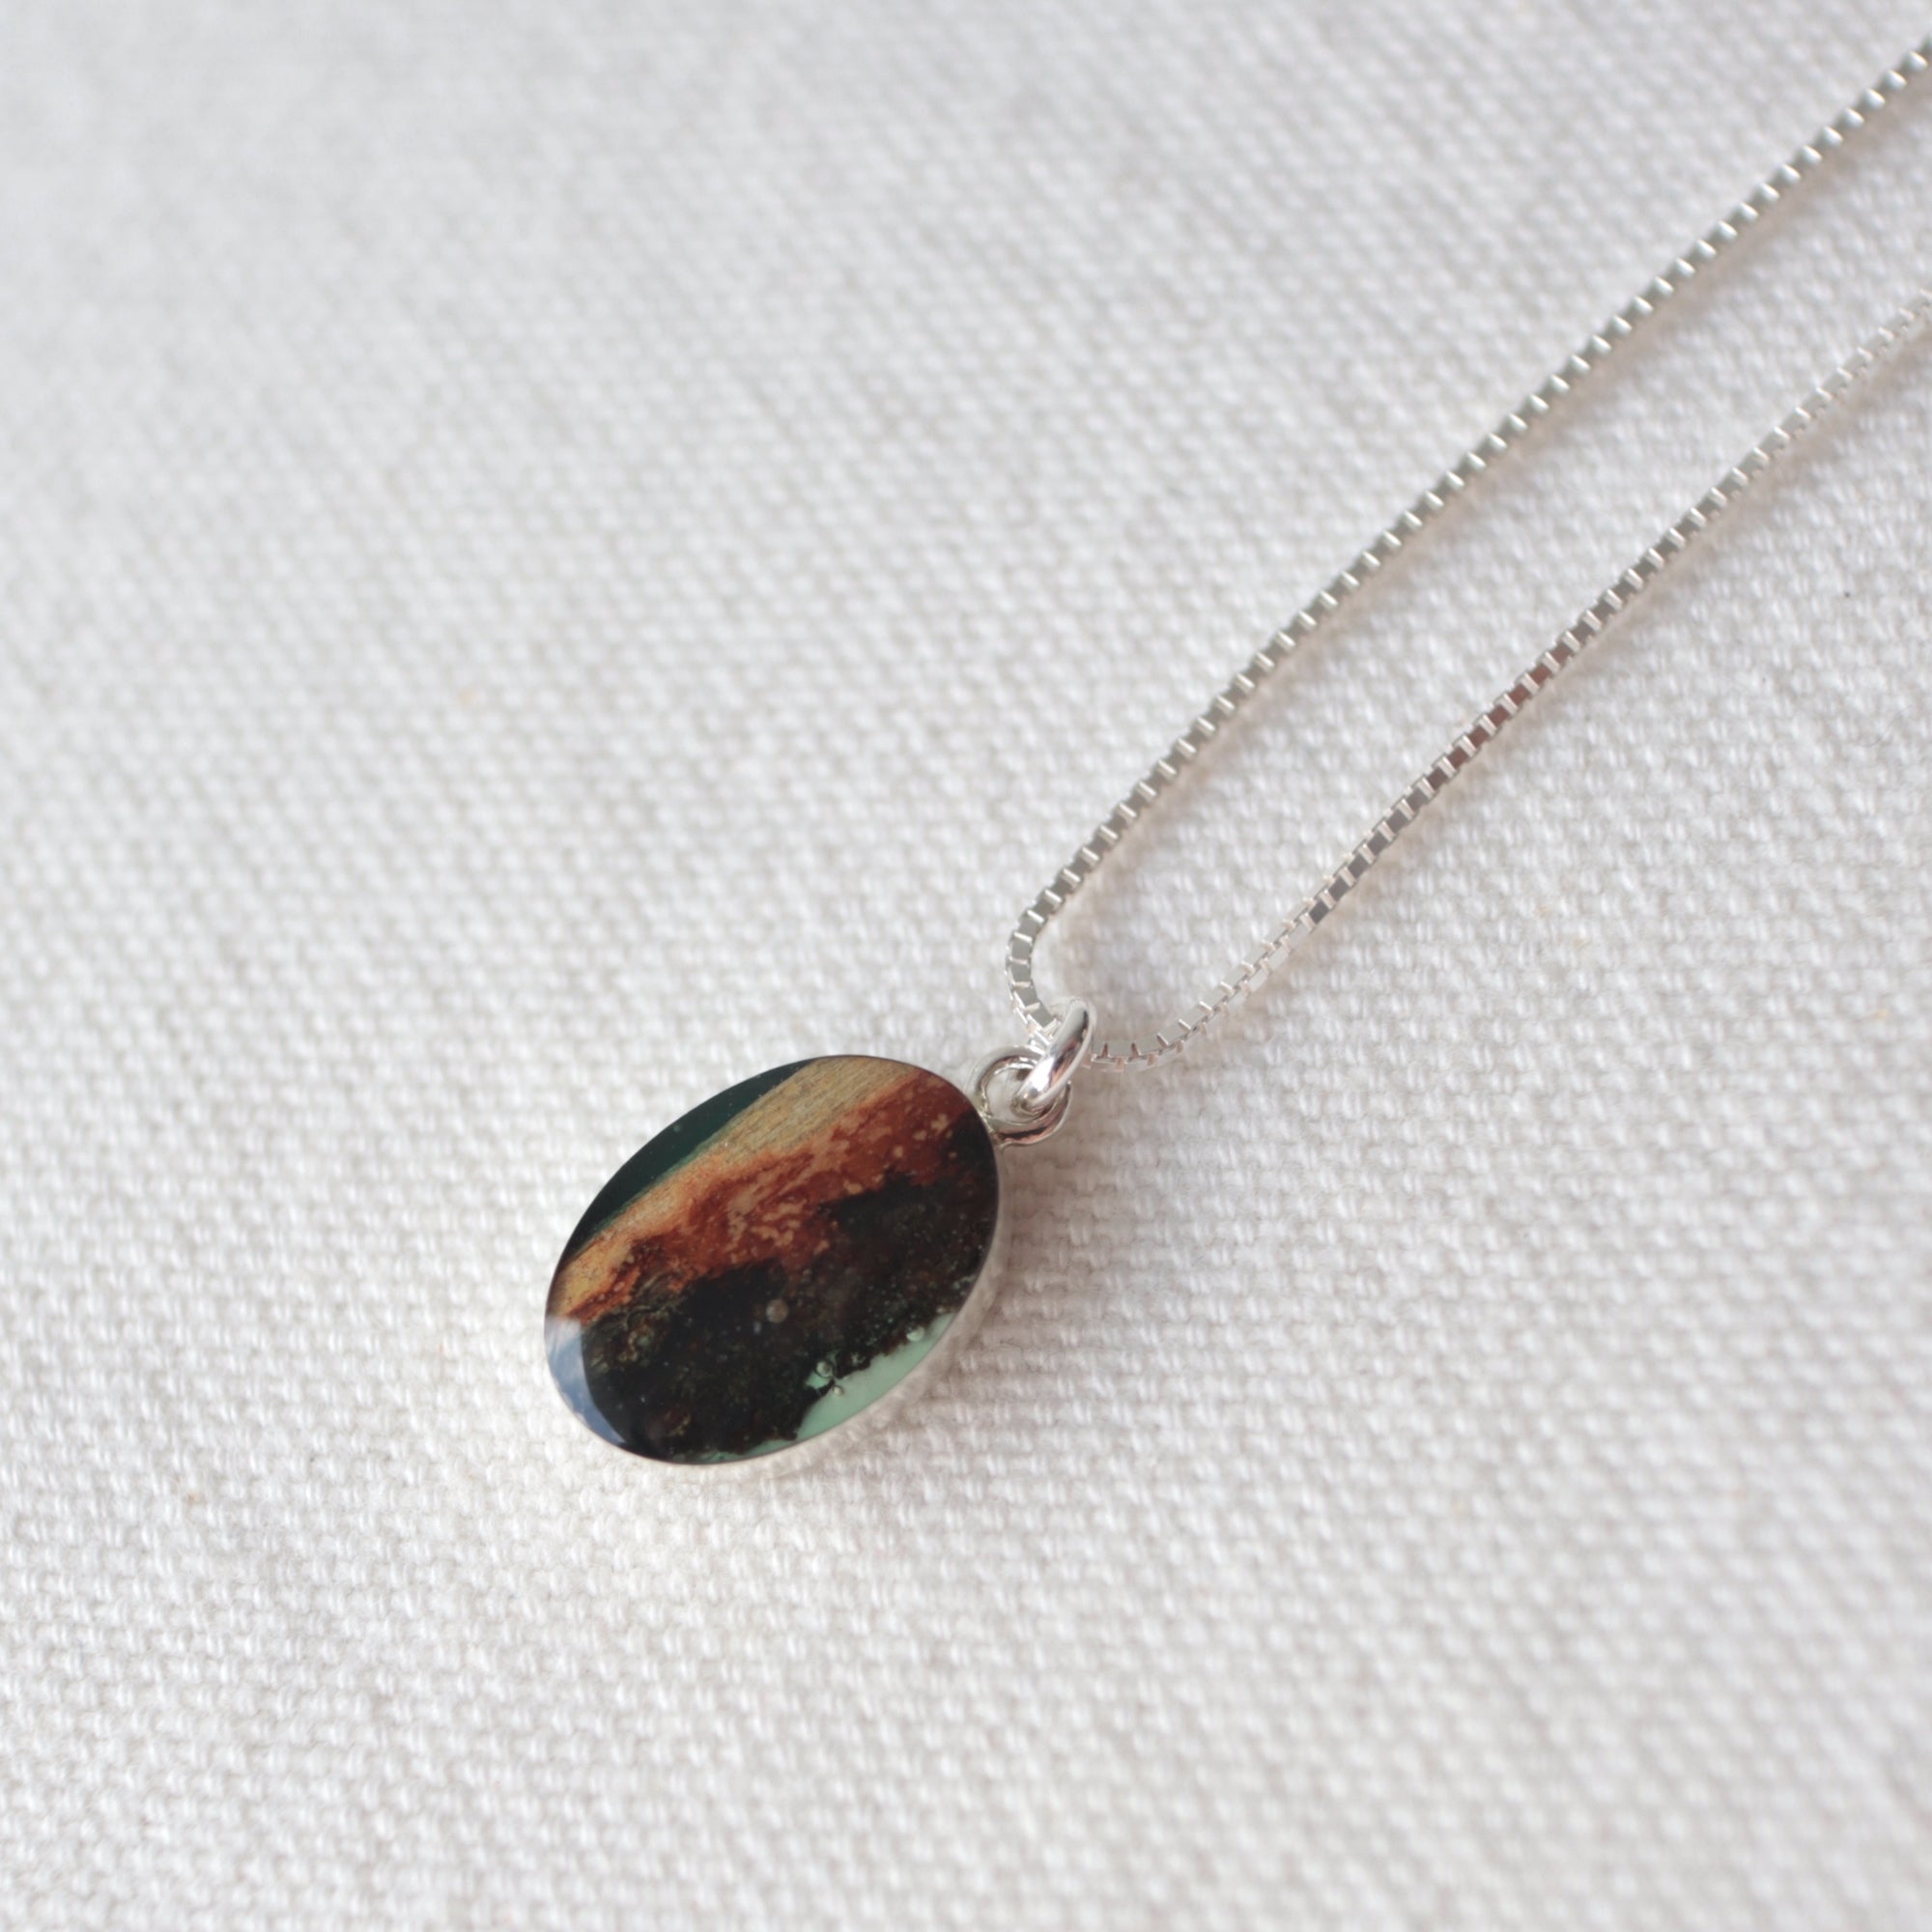 Silver and Reclaimed Wood Necklace with Bark | Wood Jewellery | Handmade by Wild Blue Yonder Jewelry